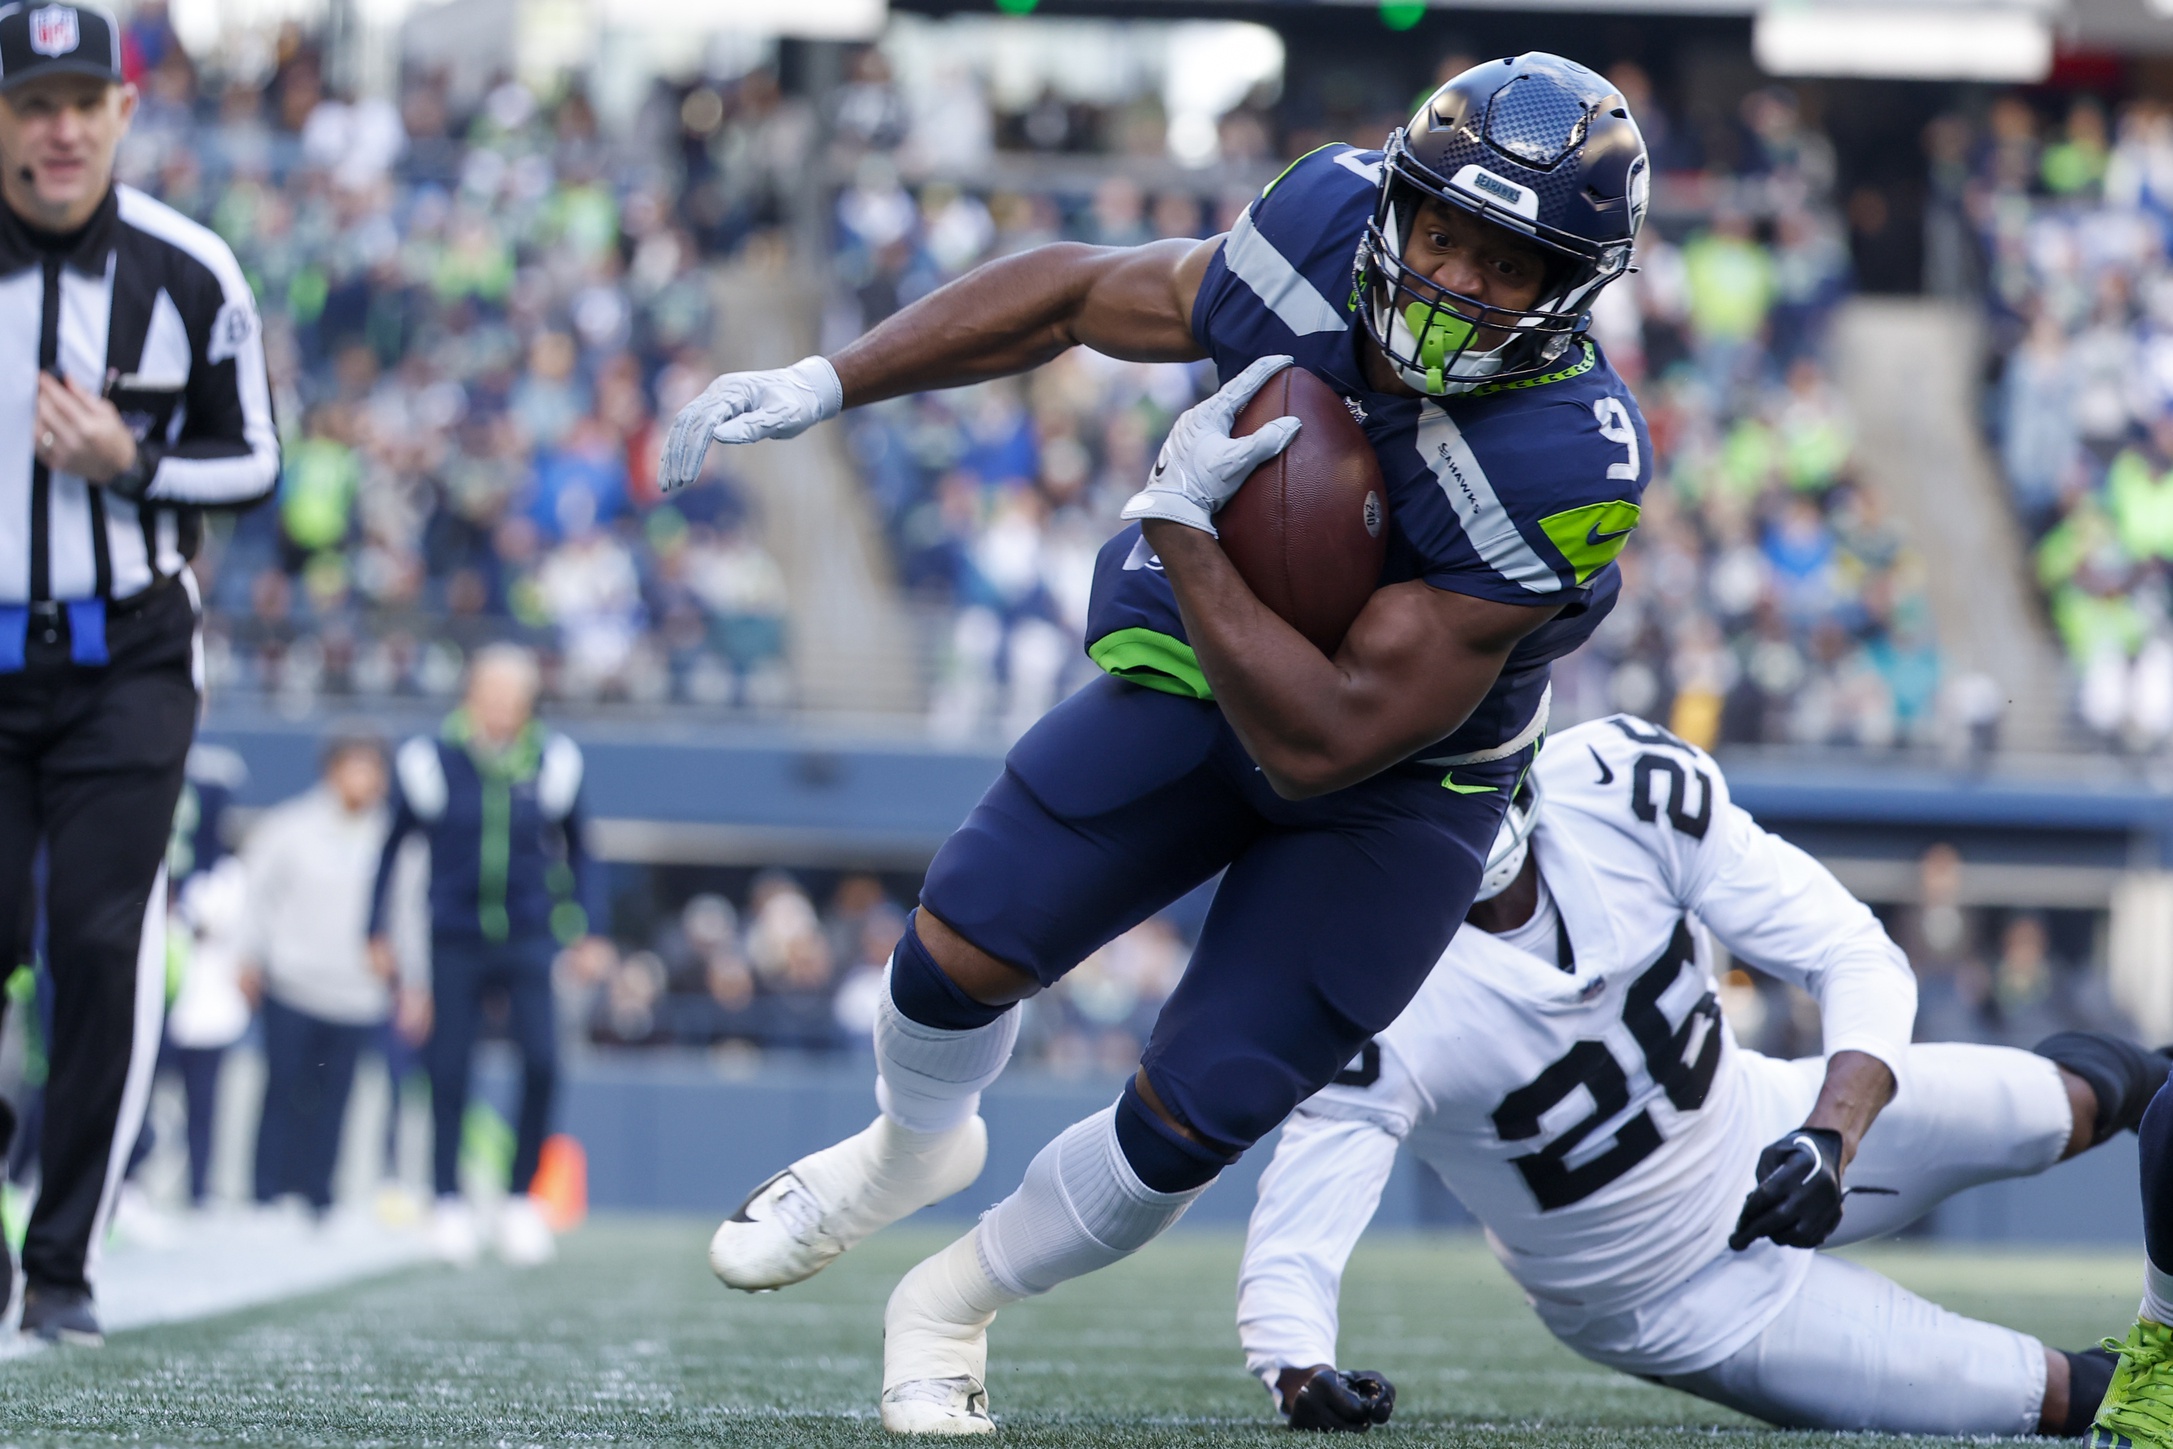 NFL DFS Picks for Thursday Night Football: Seahawks vs. 49ers Lineup  Includes Christian McCaffrey, Kenneth Walker III, and Danny Gray